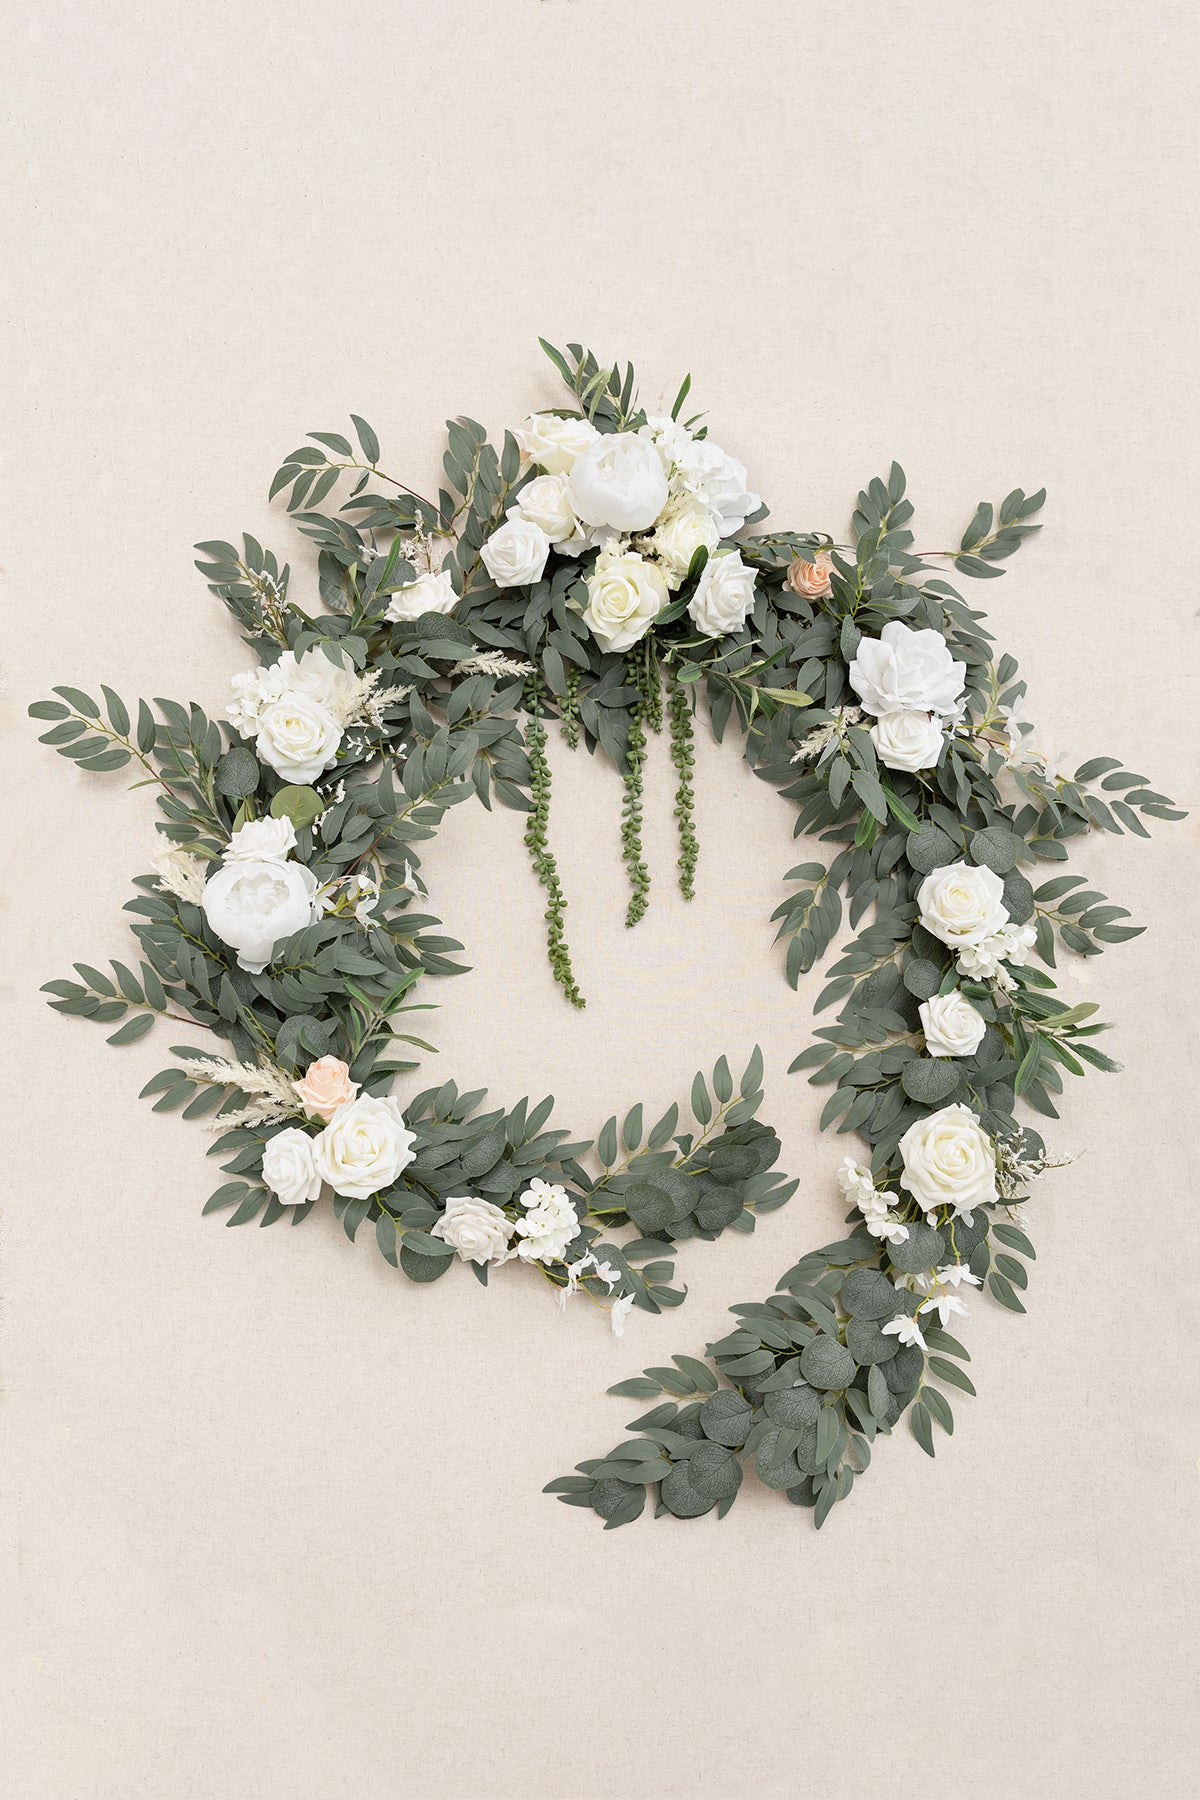 Wedding Head Table Decor  9ft Flower Garland for Sweetheart/Head Table -  White & Sage – Ling's Moment